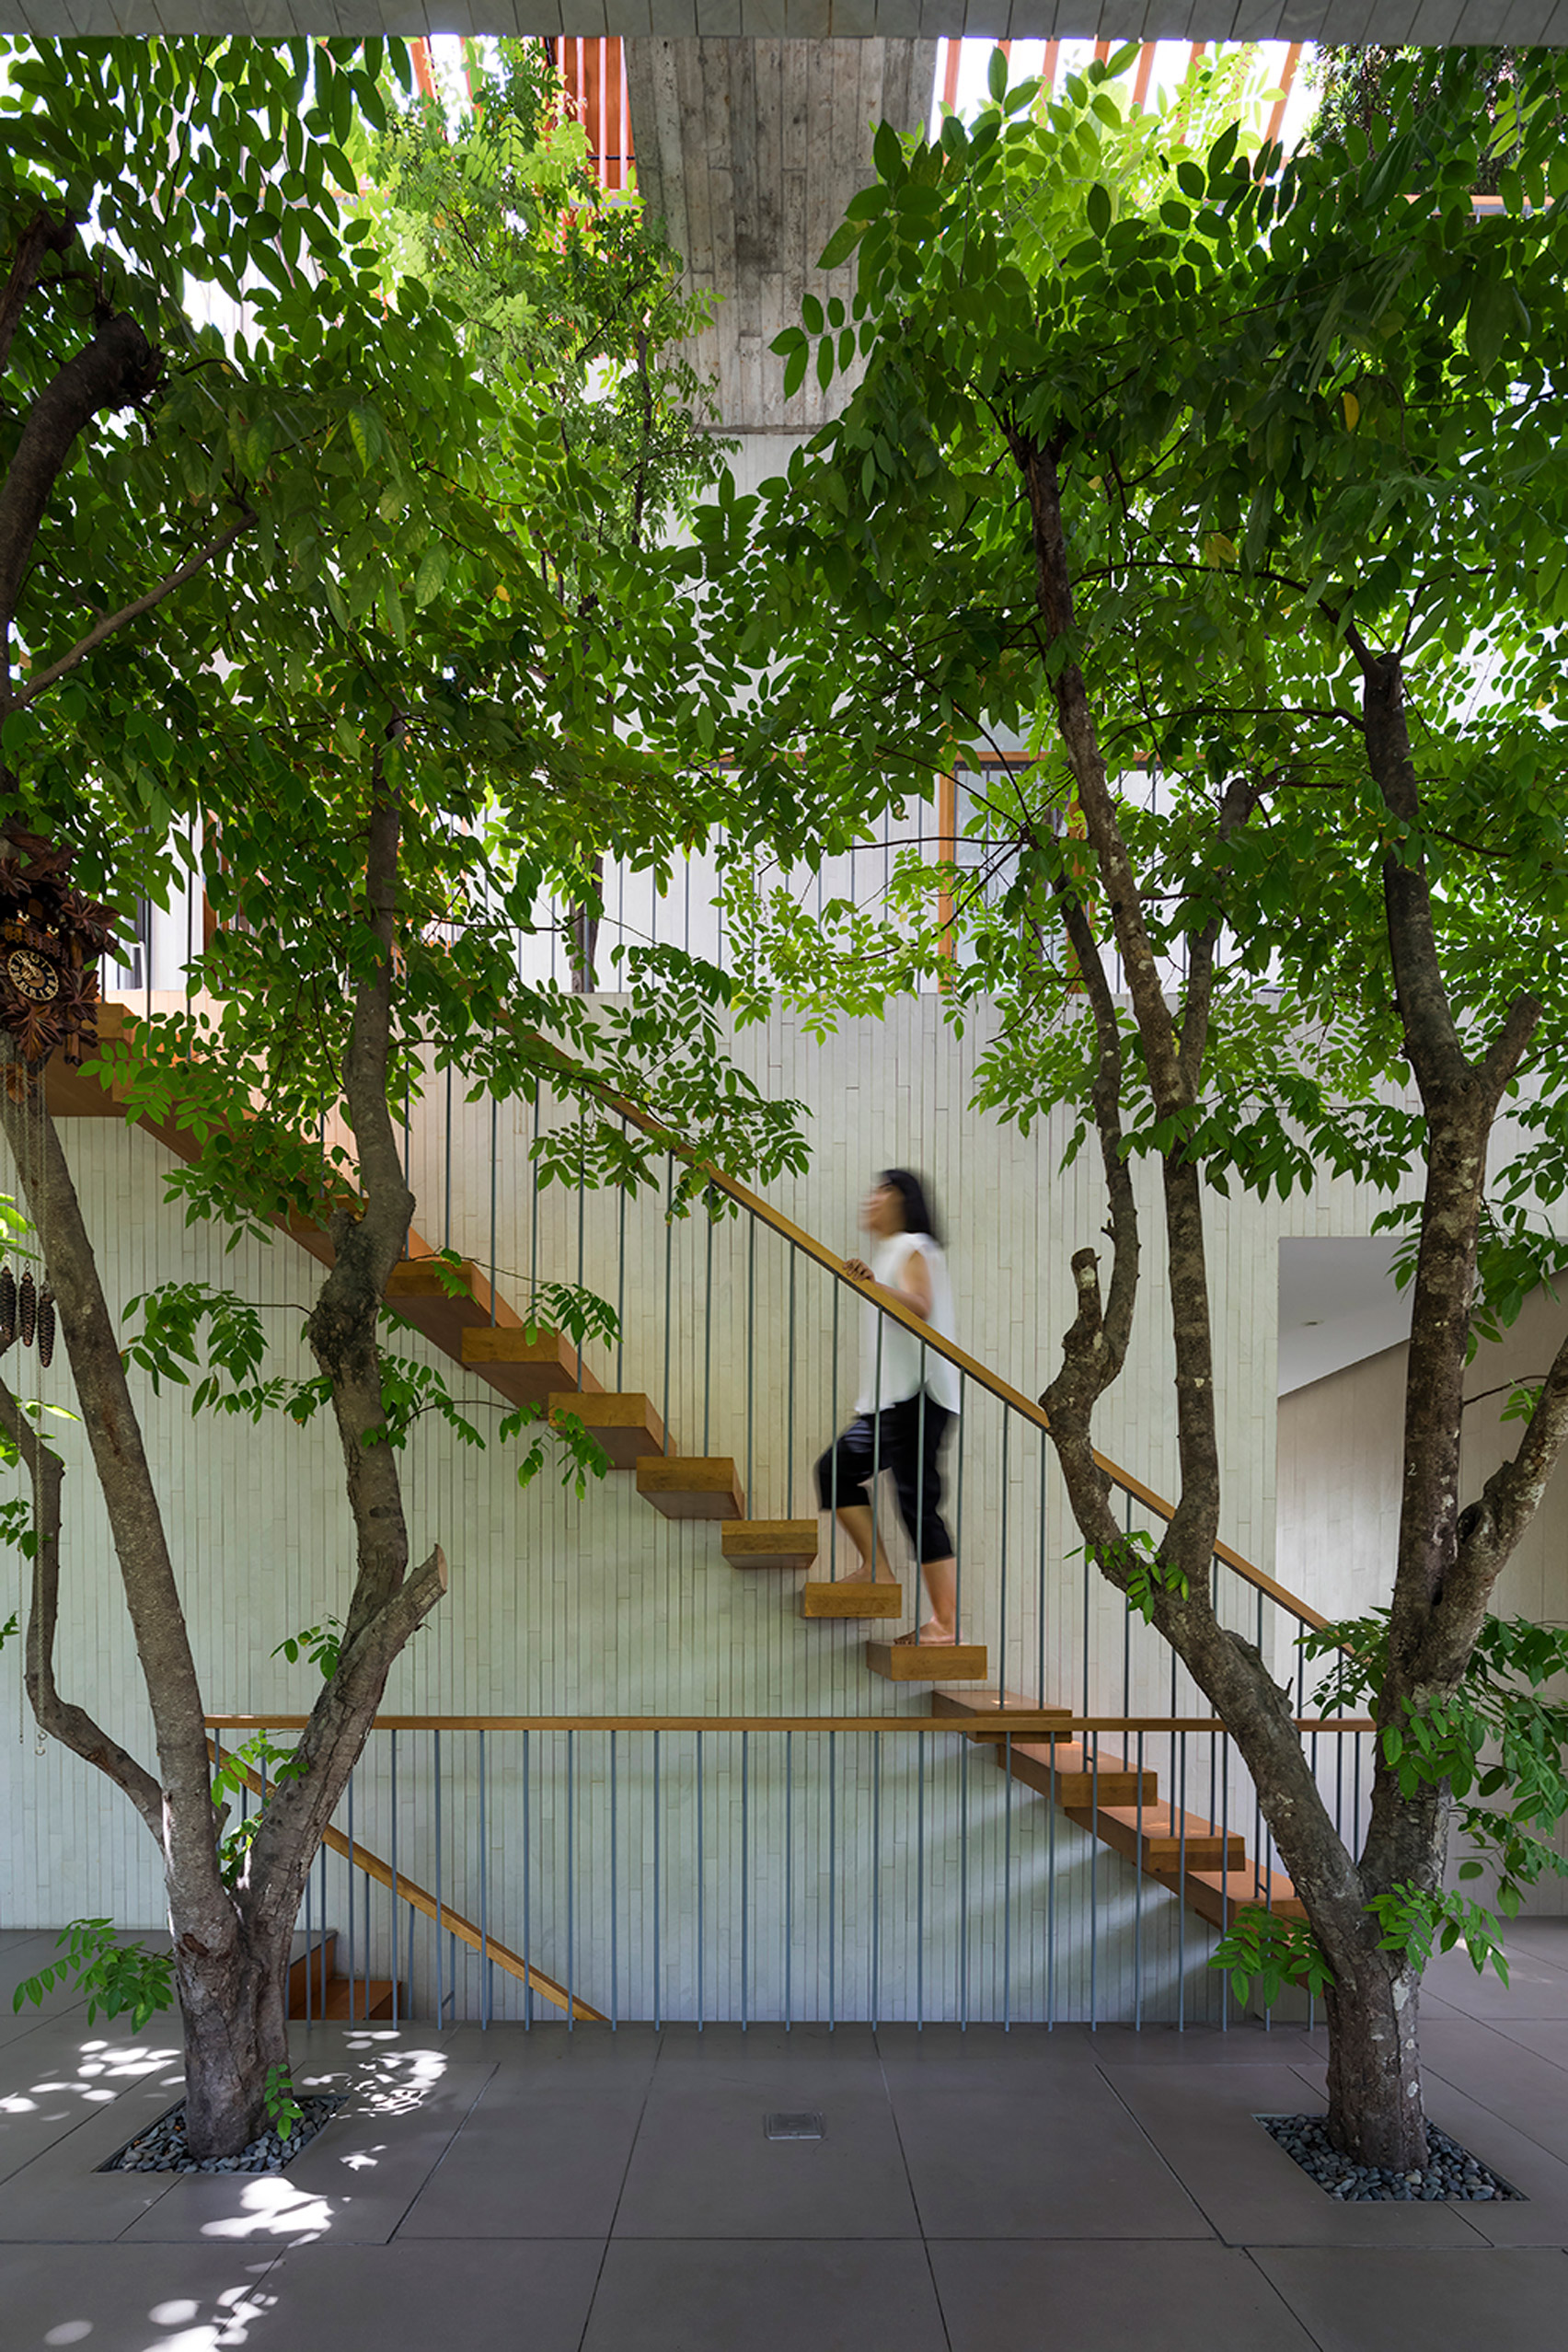 Staircase in Stepping Park House by Vo Trong Nghia in Ho Chi Minh City, Vietnam